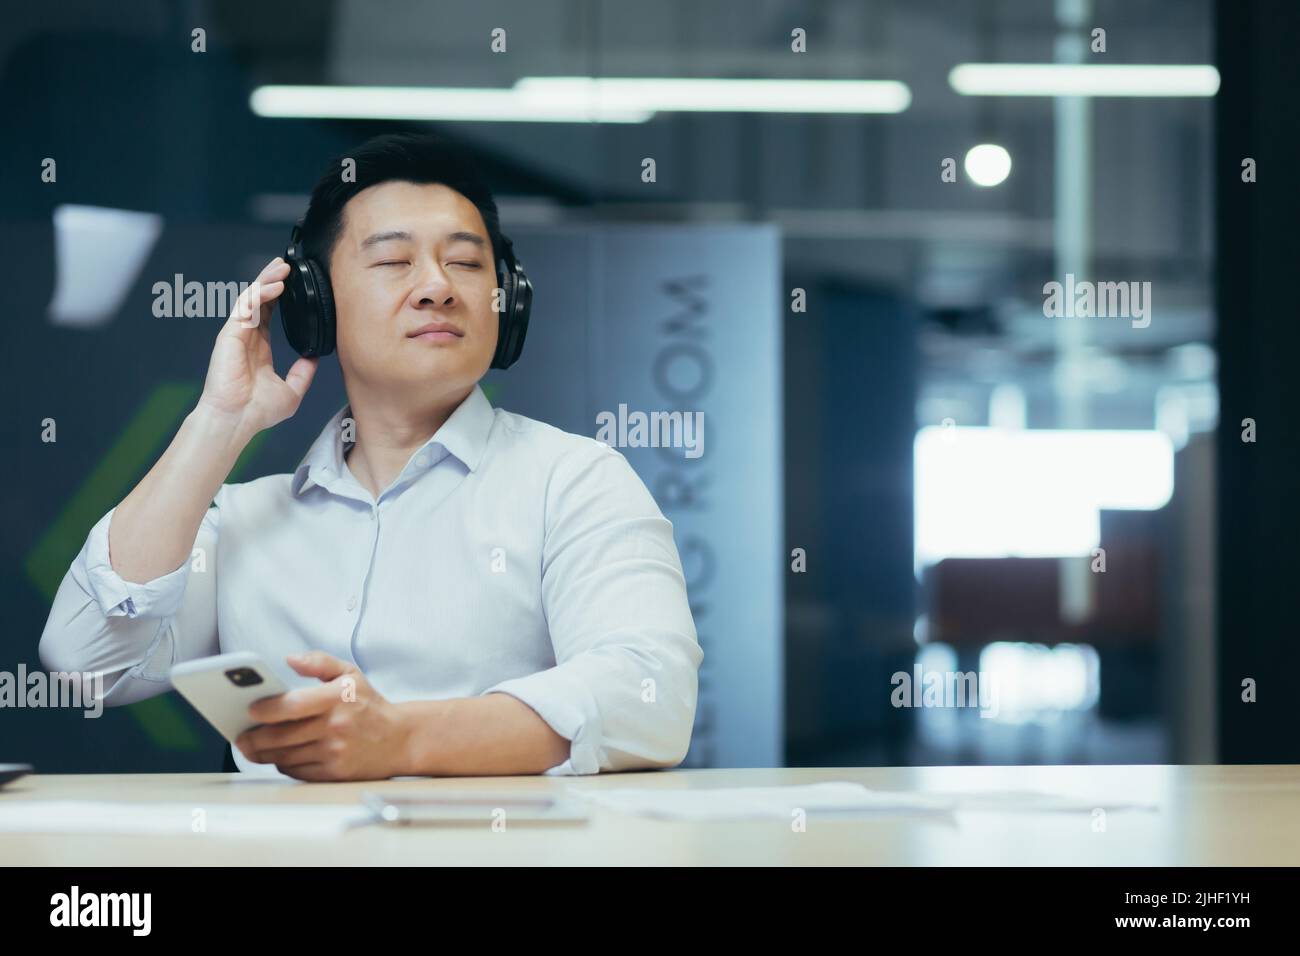 Asian boss business owner relaxing in office, listening relaxing and relaxing music, man sitting at desk, using big headphones and online listening app on phone Stock Photo